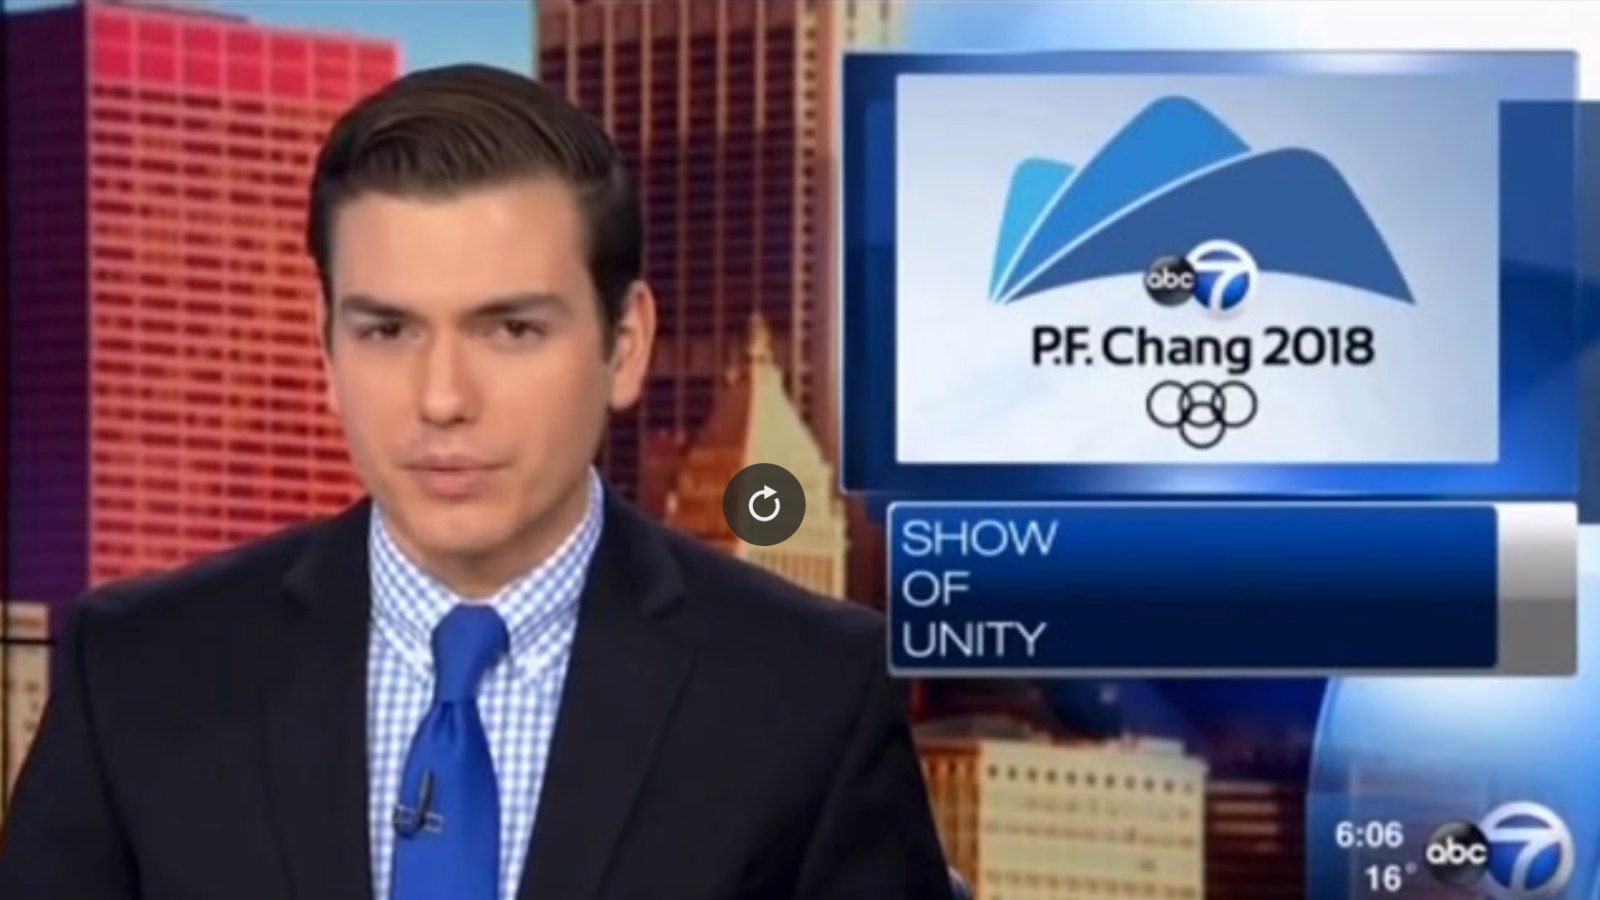 Network confuses PyeongChang with P.F. Chang